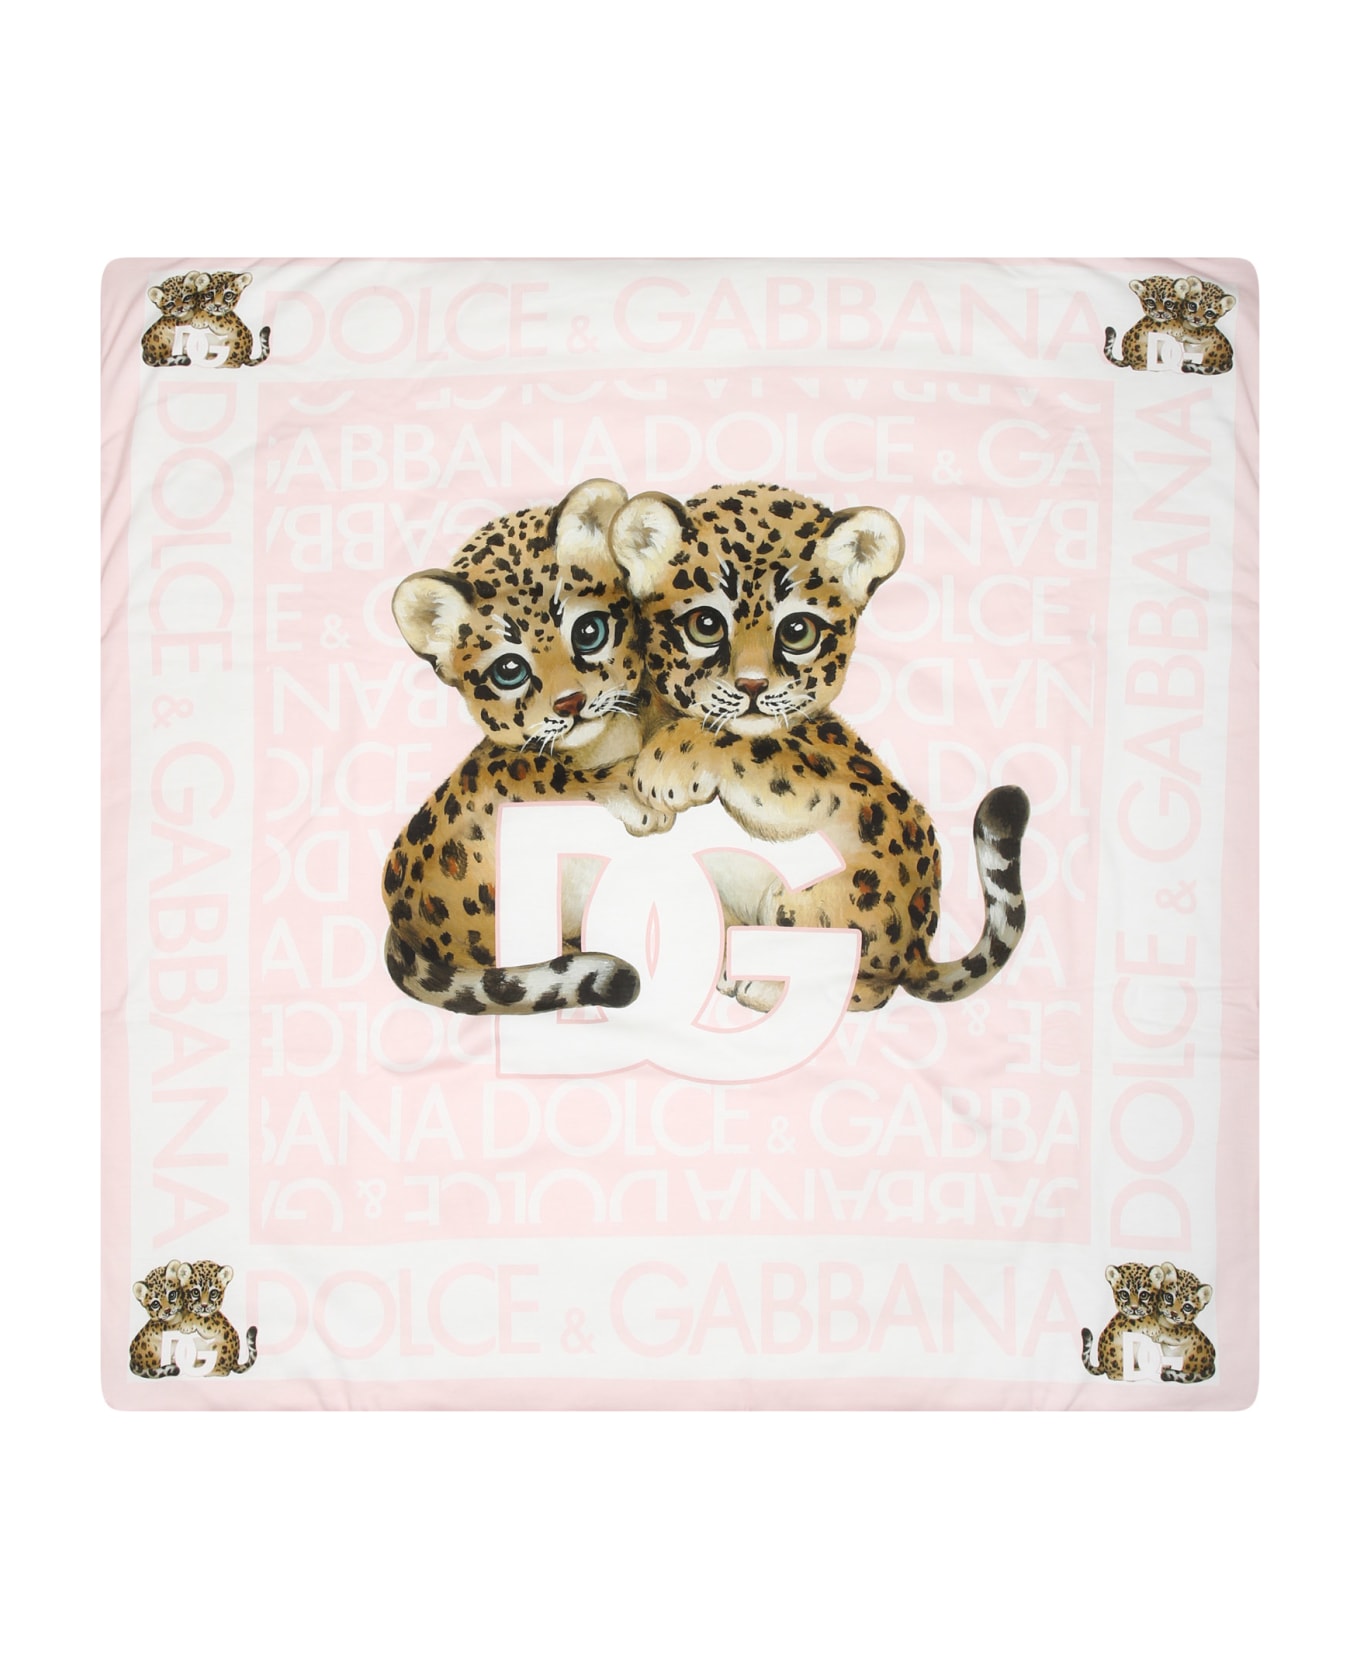 Dolce & Gabbana Pink Blanket For Baby Girl With Logomania And Leopard Print - Pink アクセサリー＆ギフト